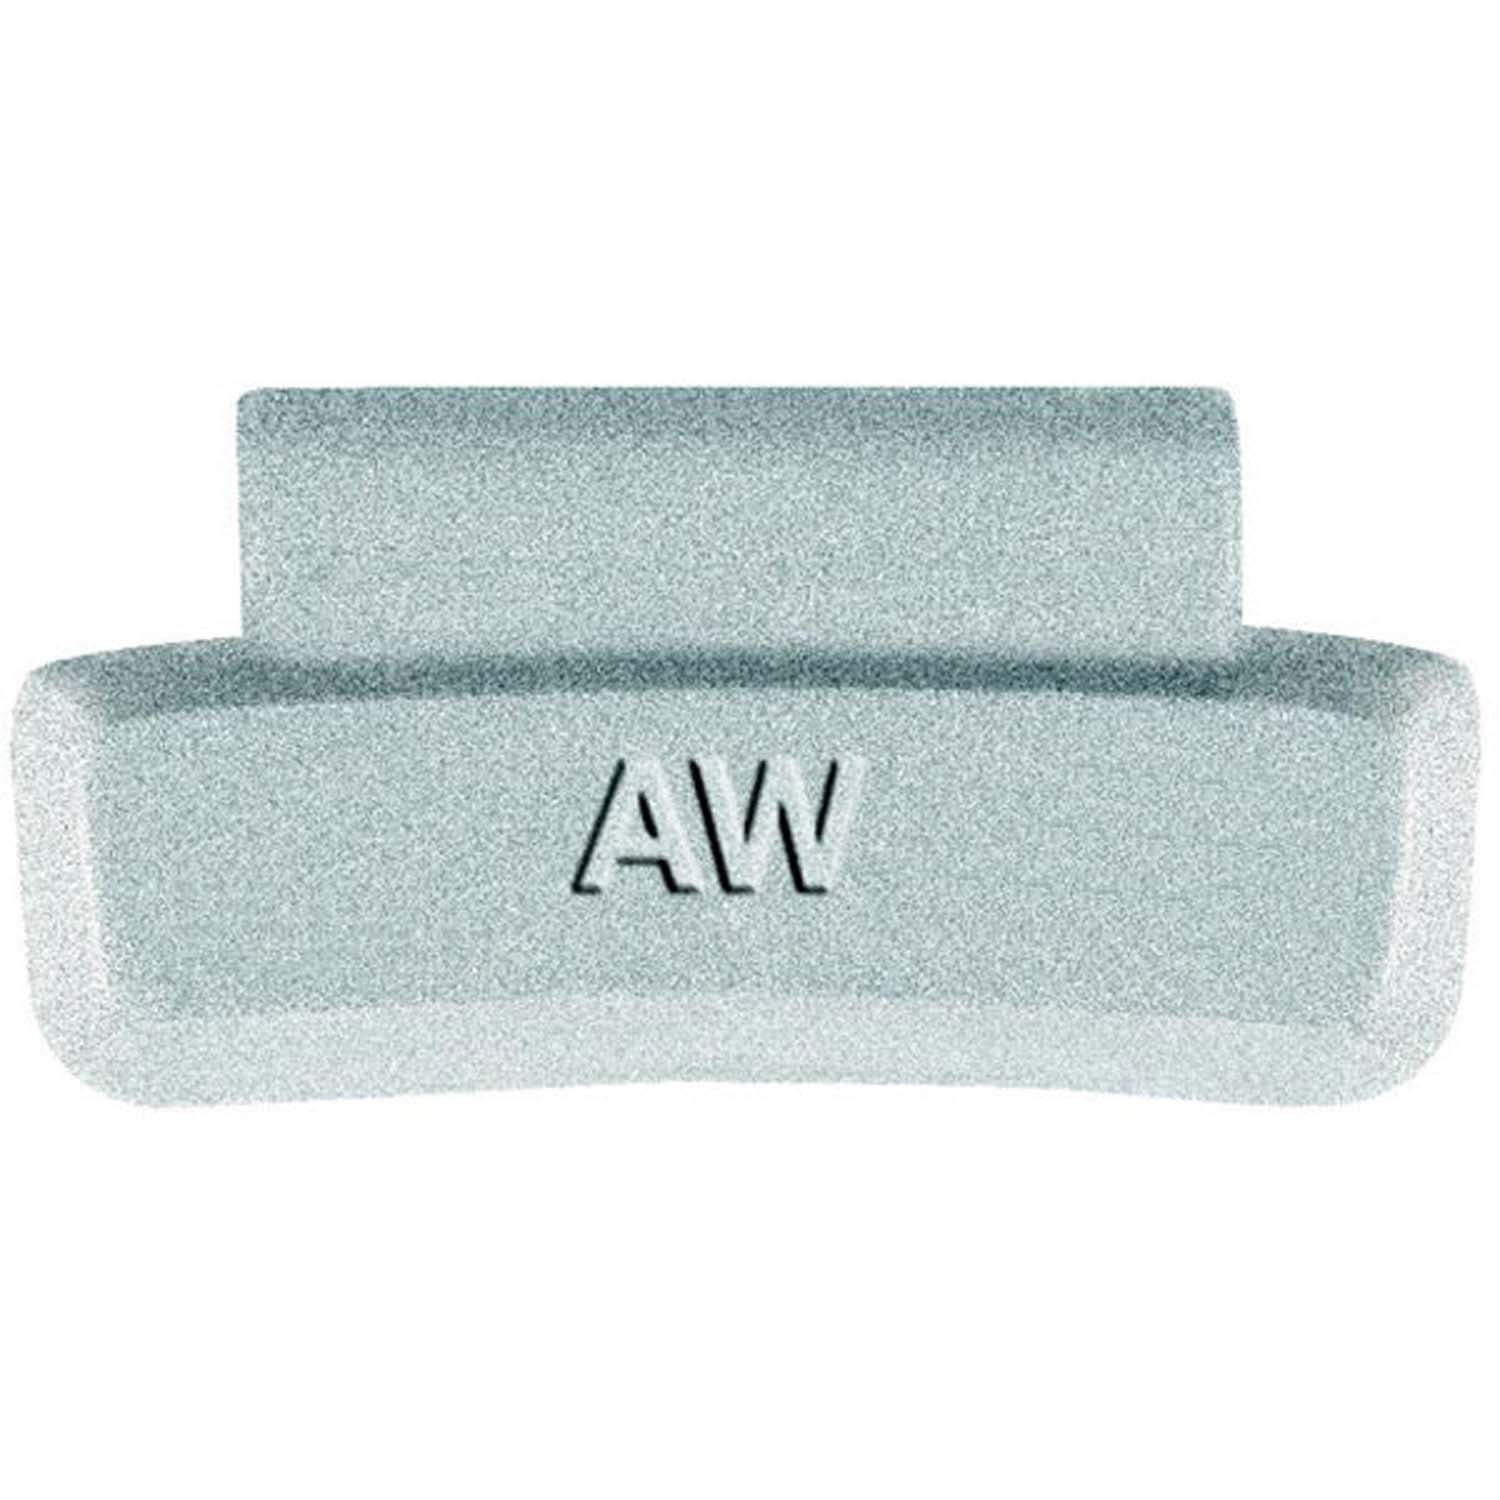 Perfect Equipment AW100N Coated Lead Wheel Weight 1.00 oz. - Box of 25